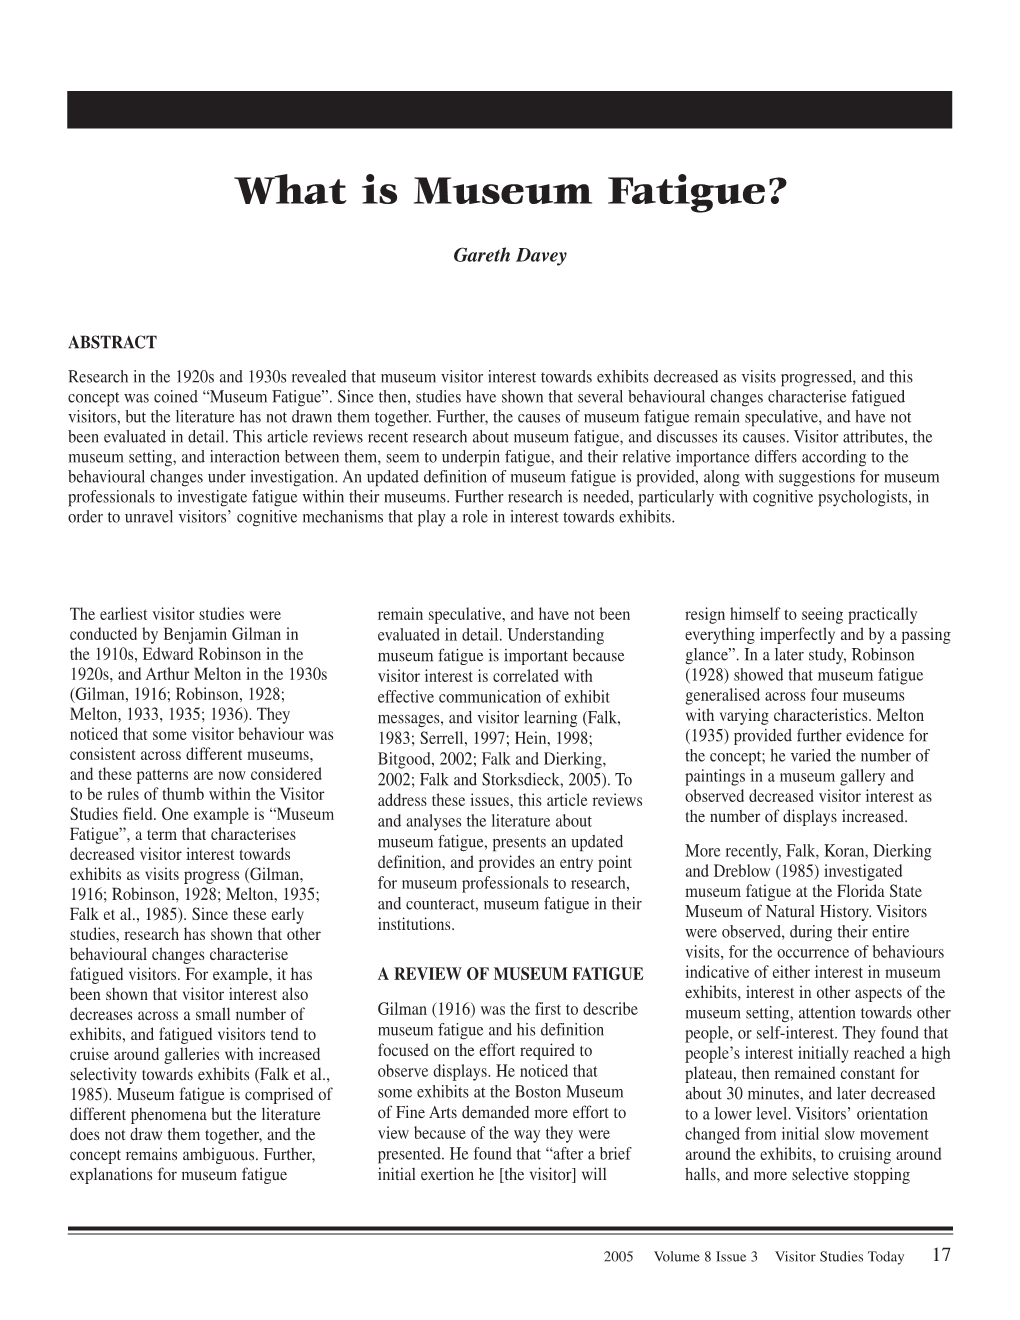 What Is Museum Fatigue?